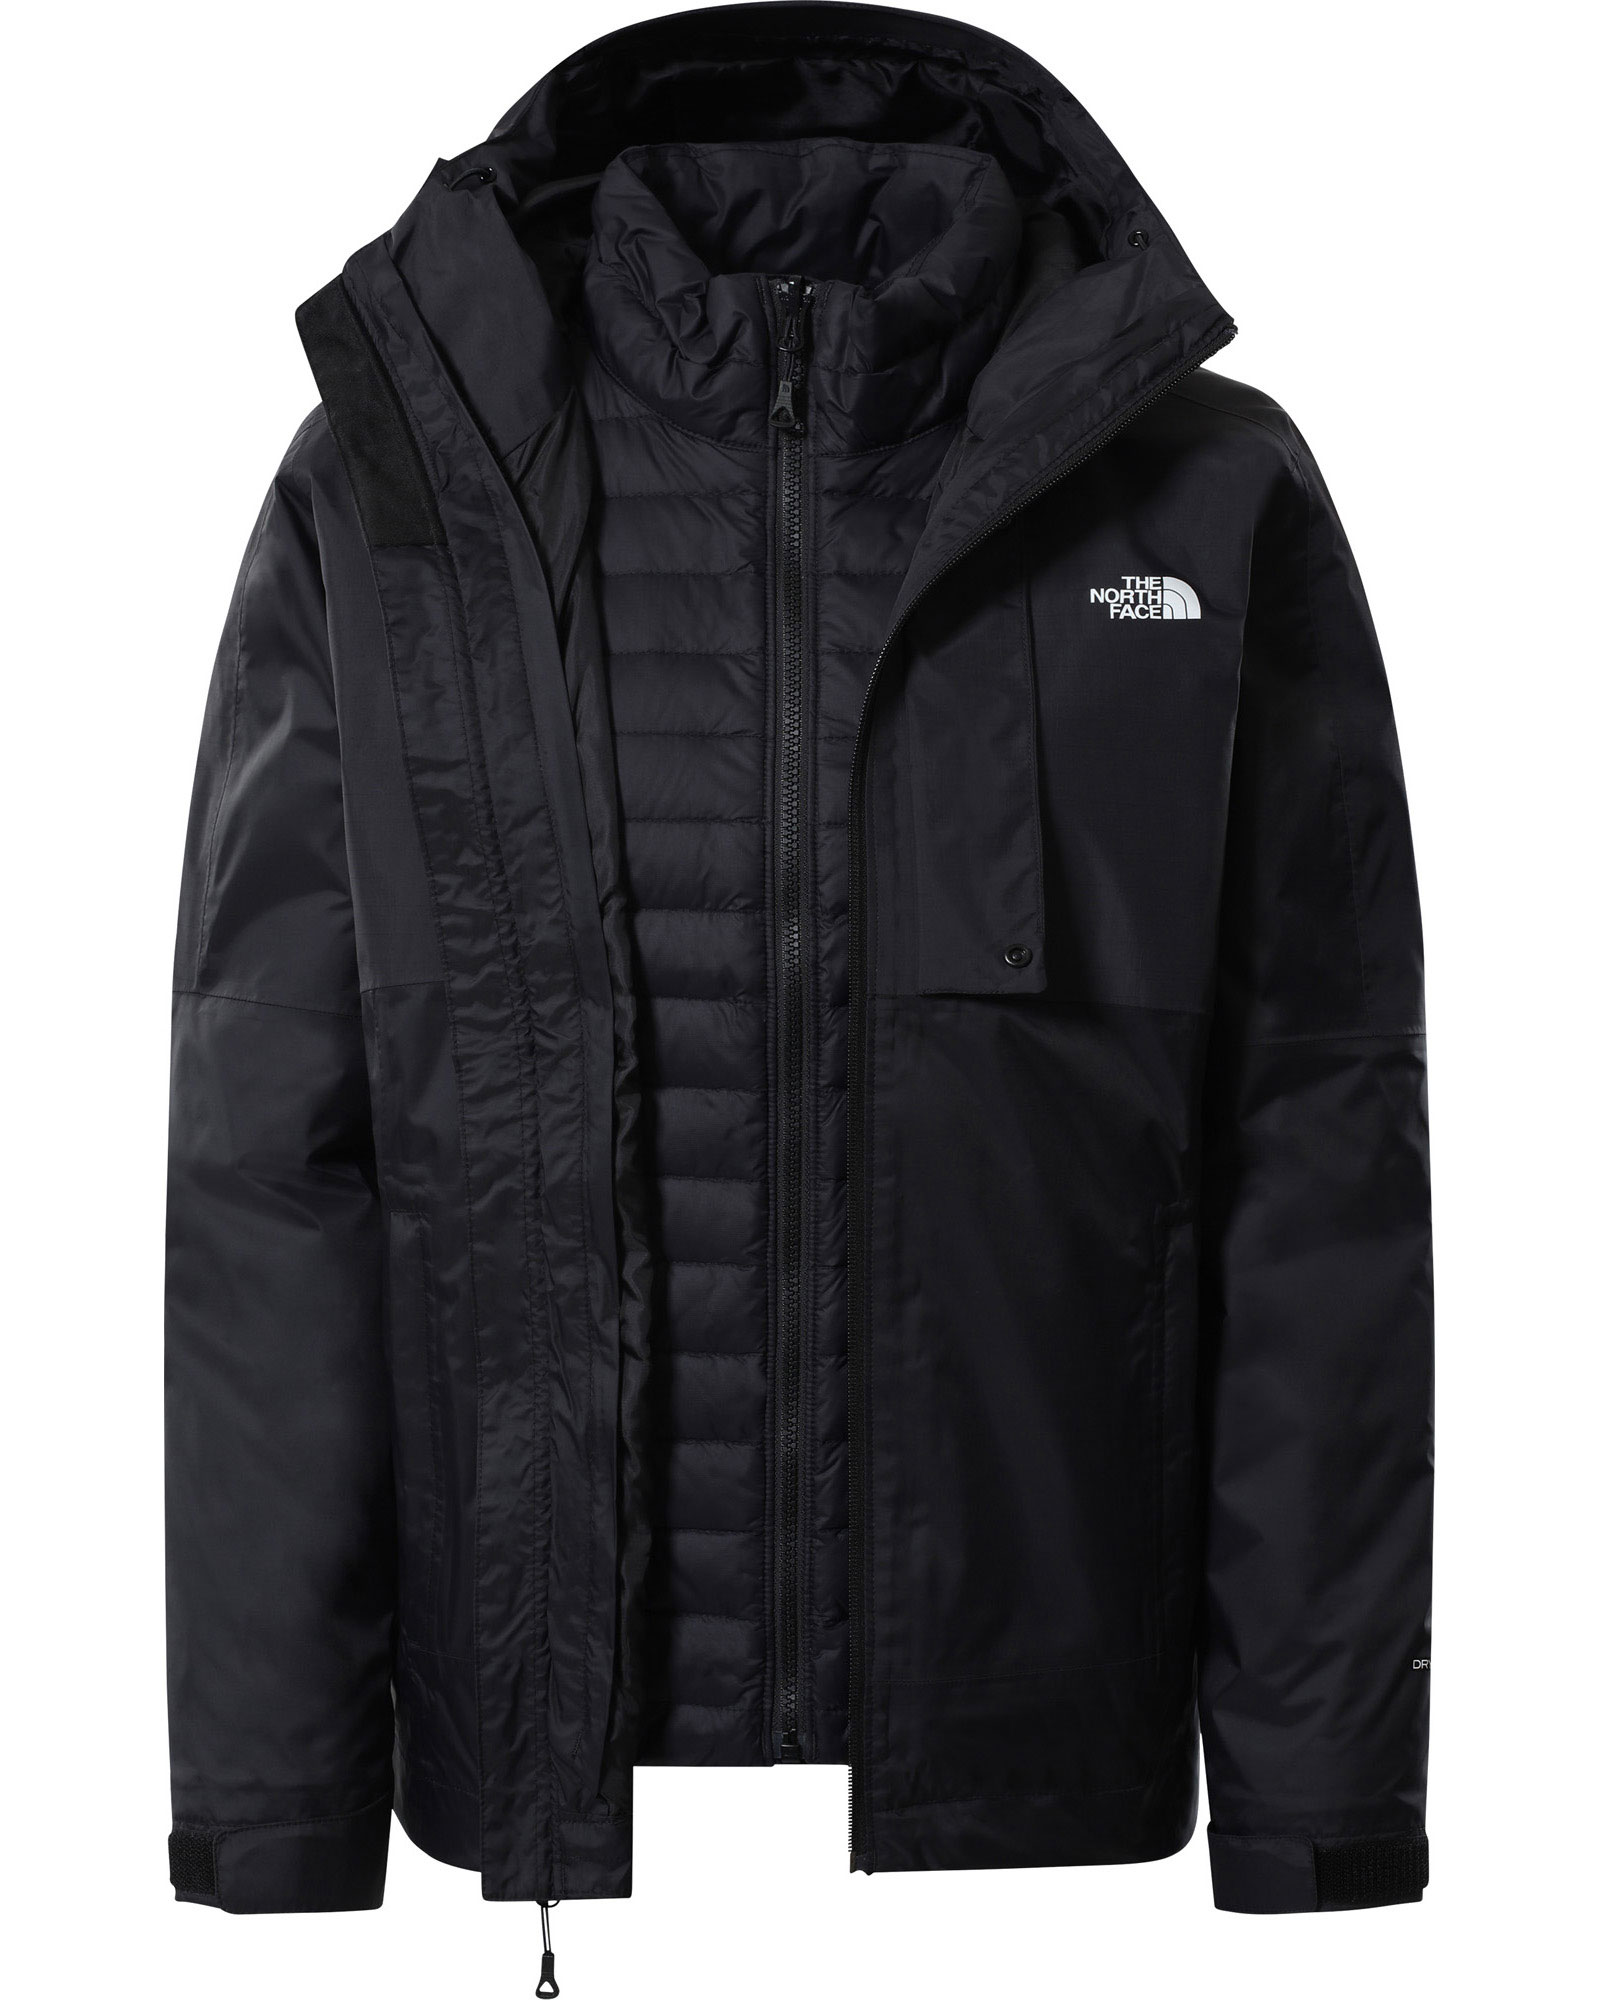 The North Face Down Insulated Triclimate Women’s Parka Jacket - TNF Black XS